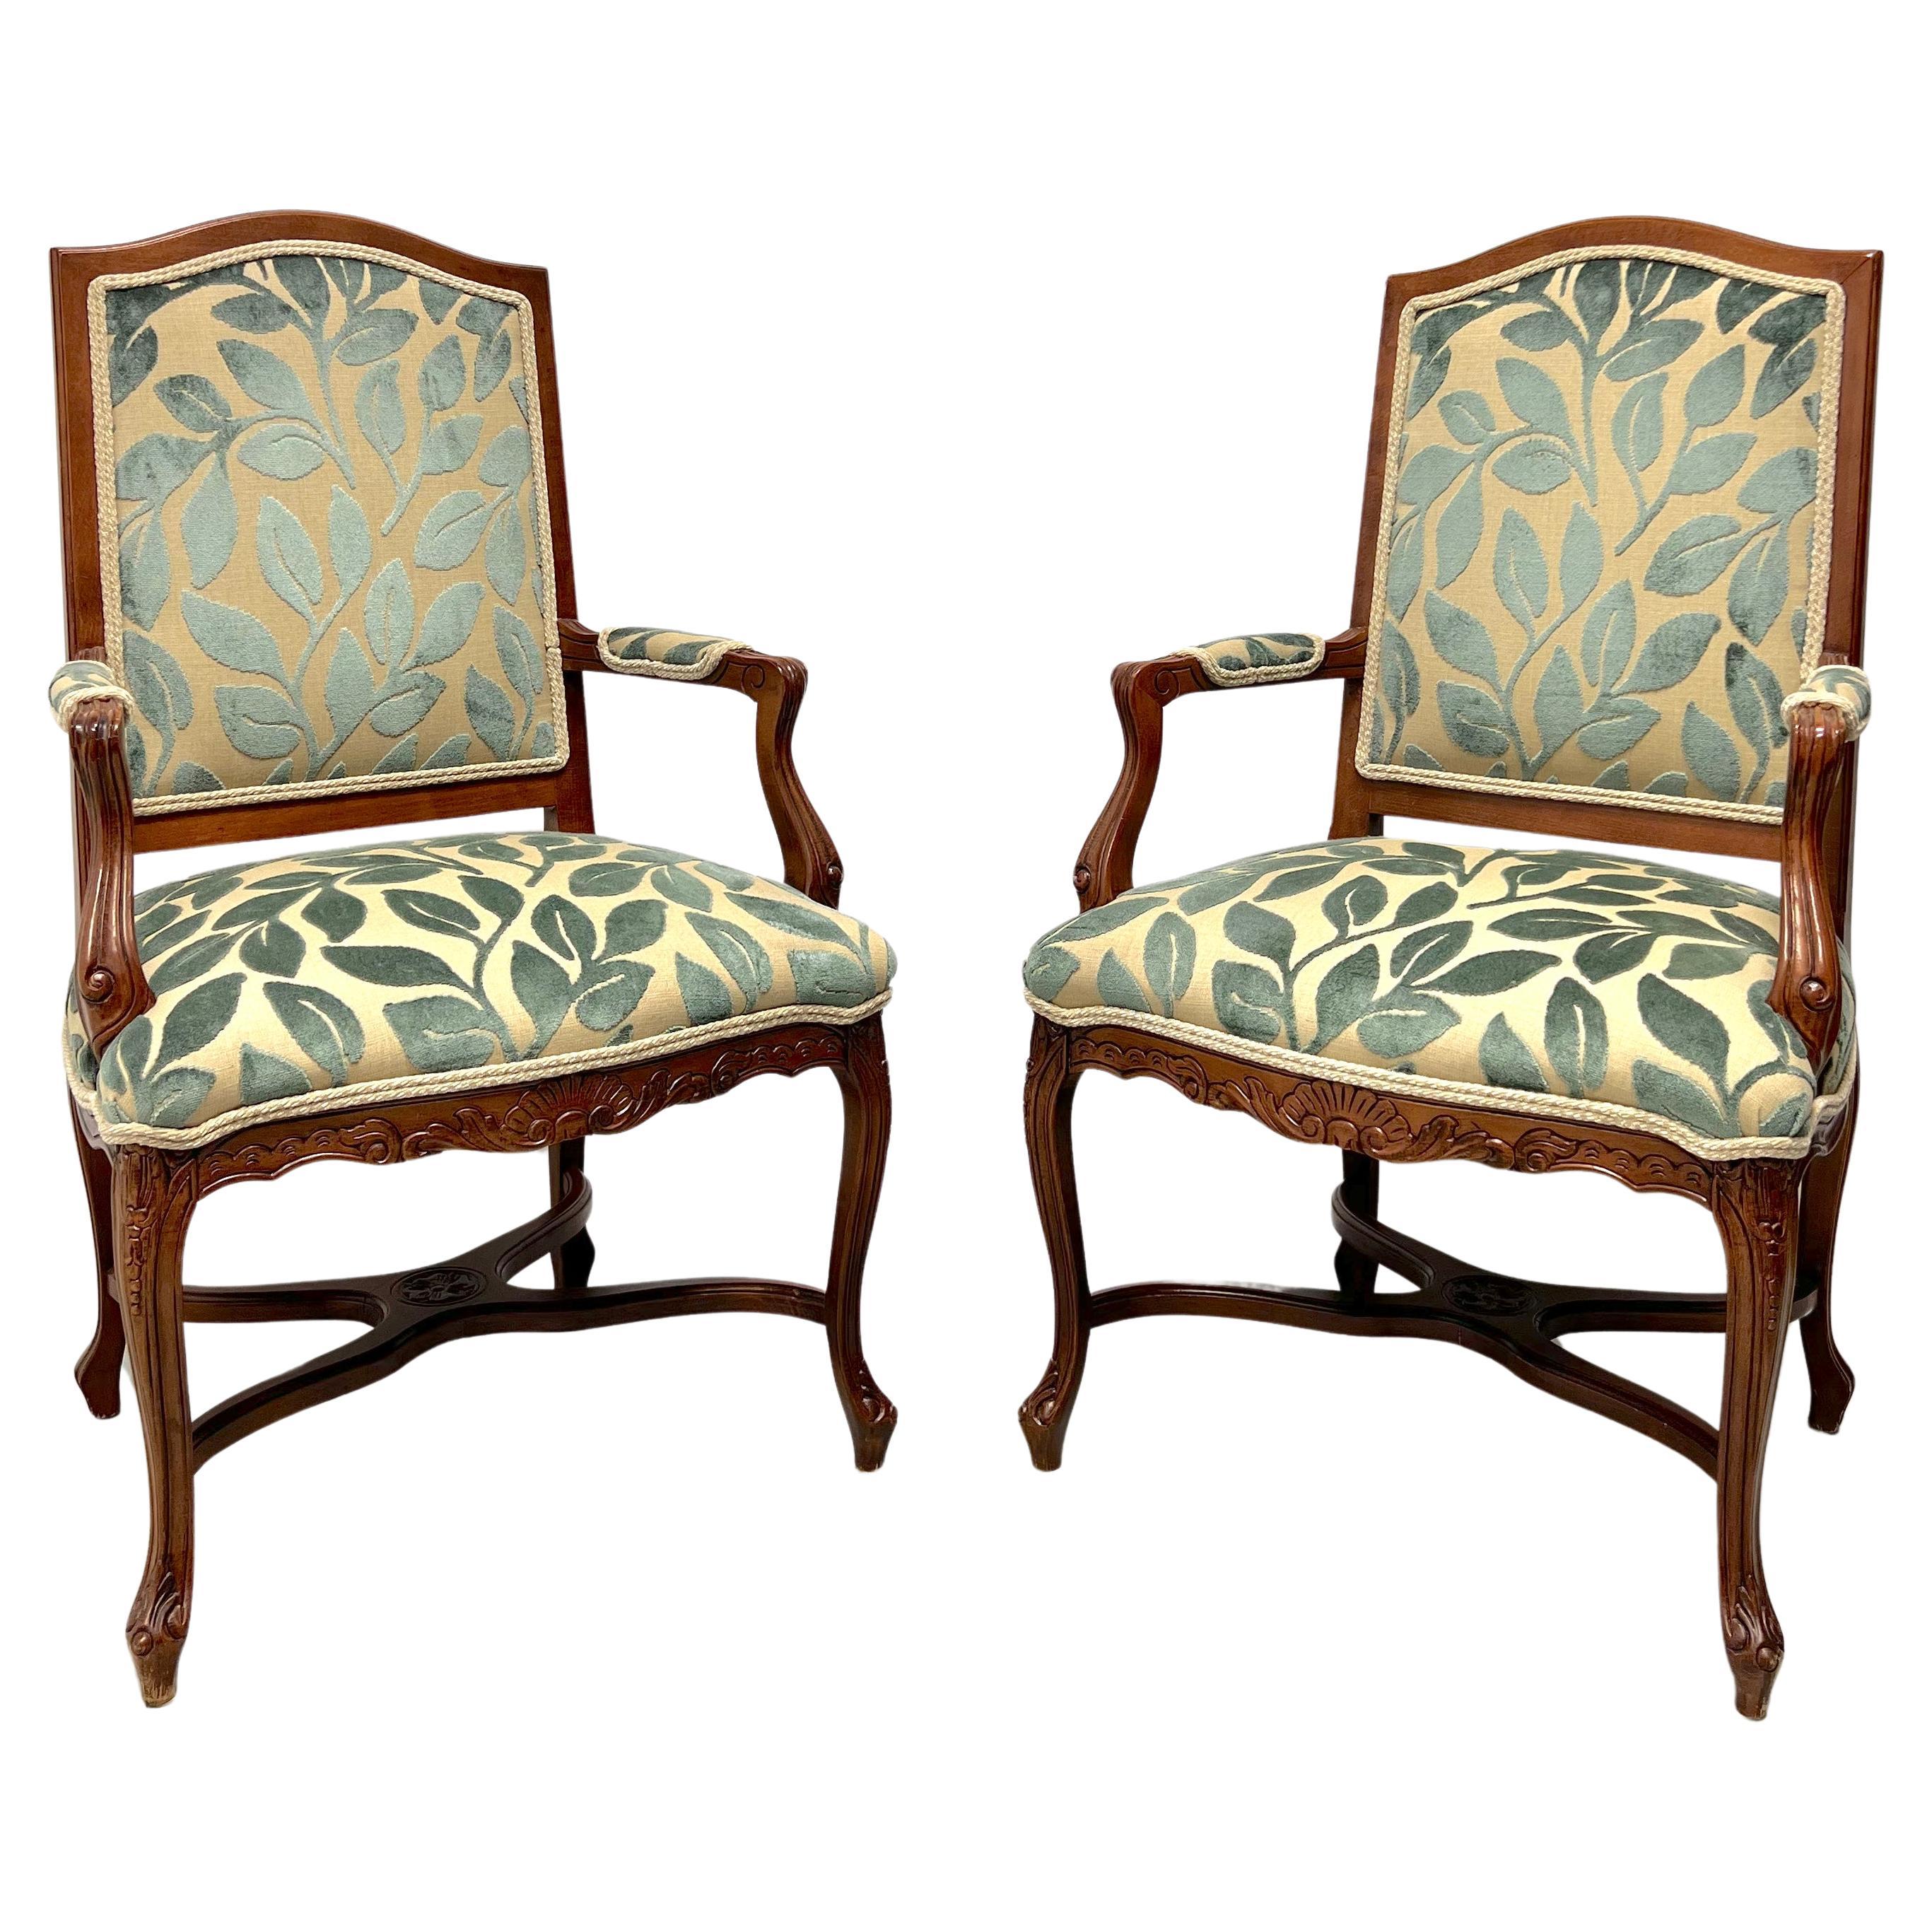 20th Century French Country Louis XV Walnut Fauteuils Open-Arm Armchairs - Pair For Sale